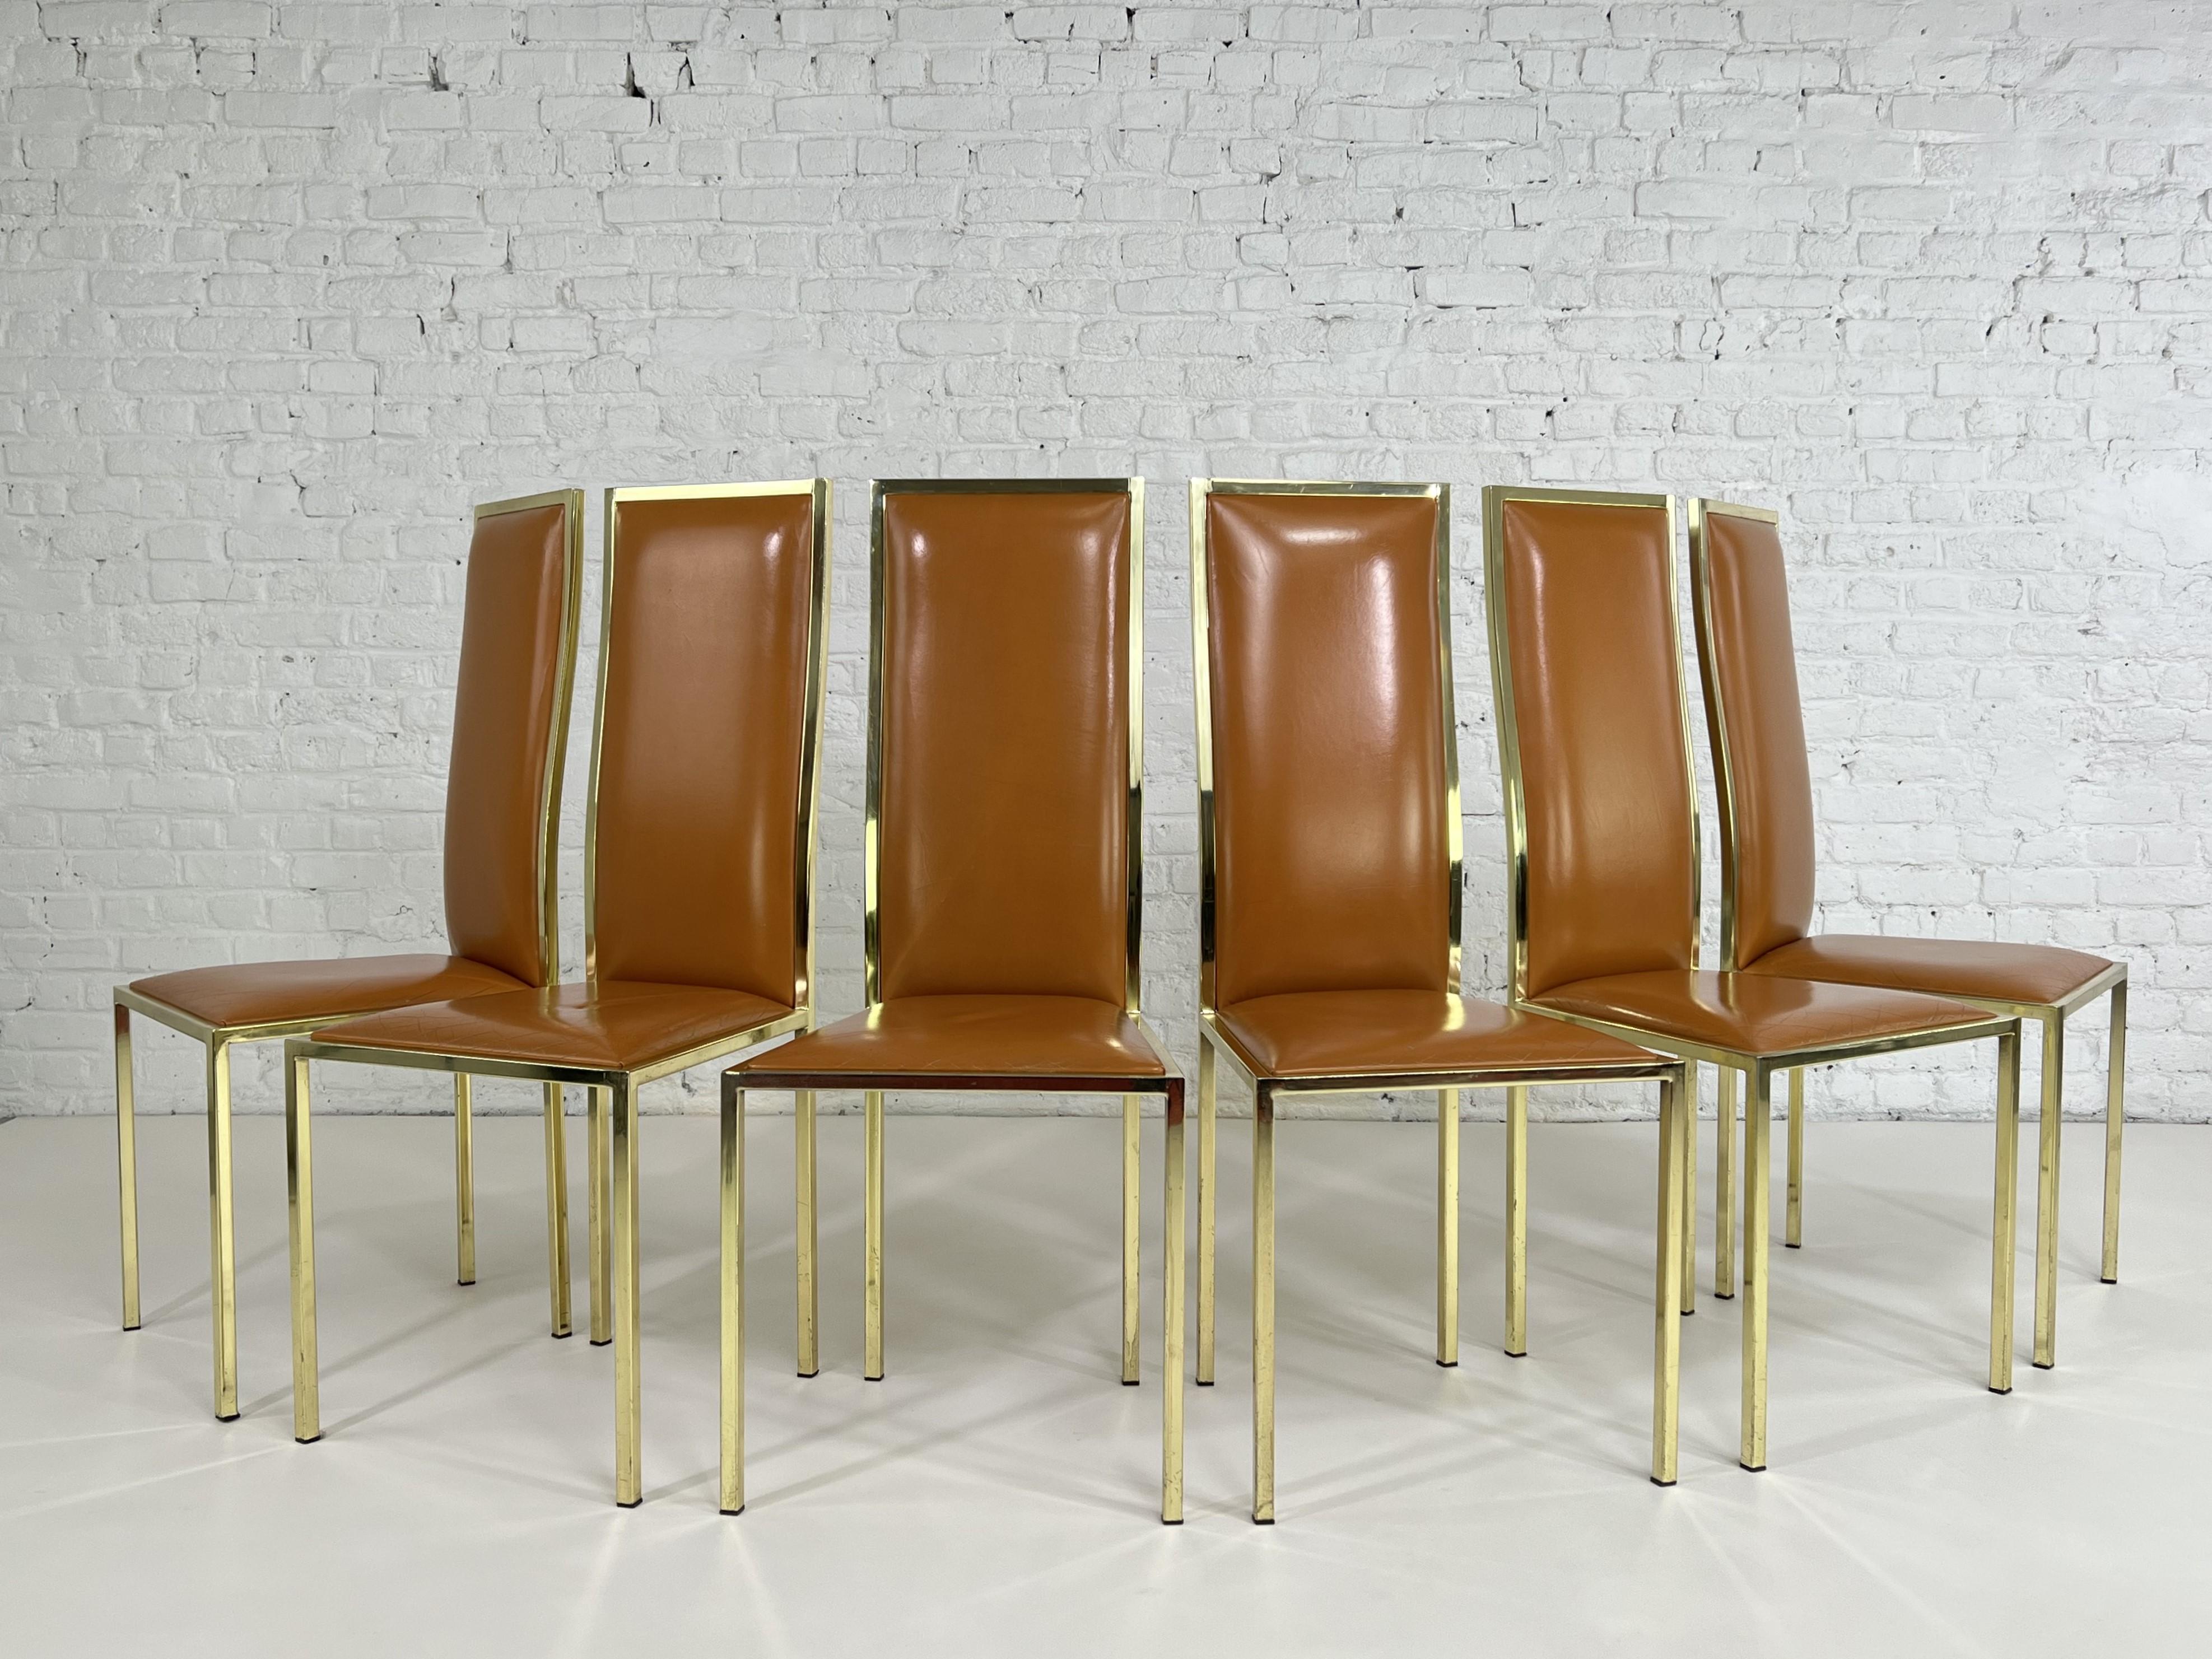 1970s Italian Renato Zevi Design Leather And Brass Set of 6 Chairs composed of a brass structure adorned with cognac leather back and seat. Beautiful patina and comfortable!